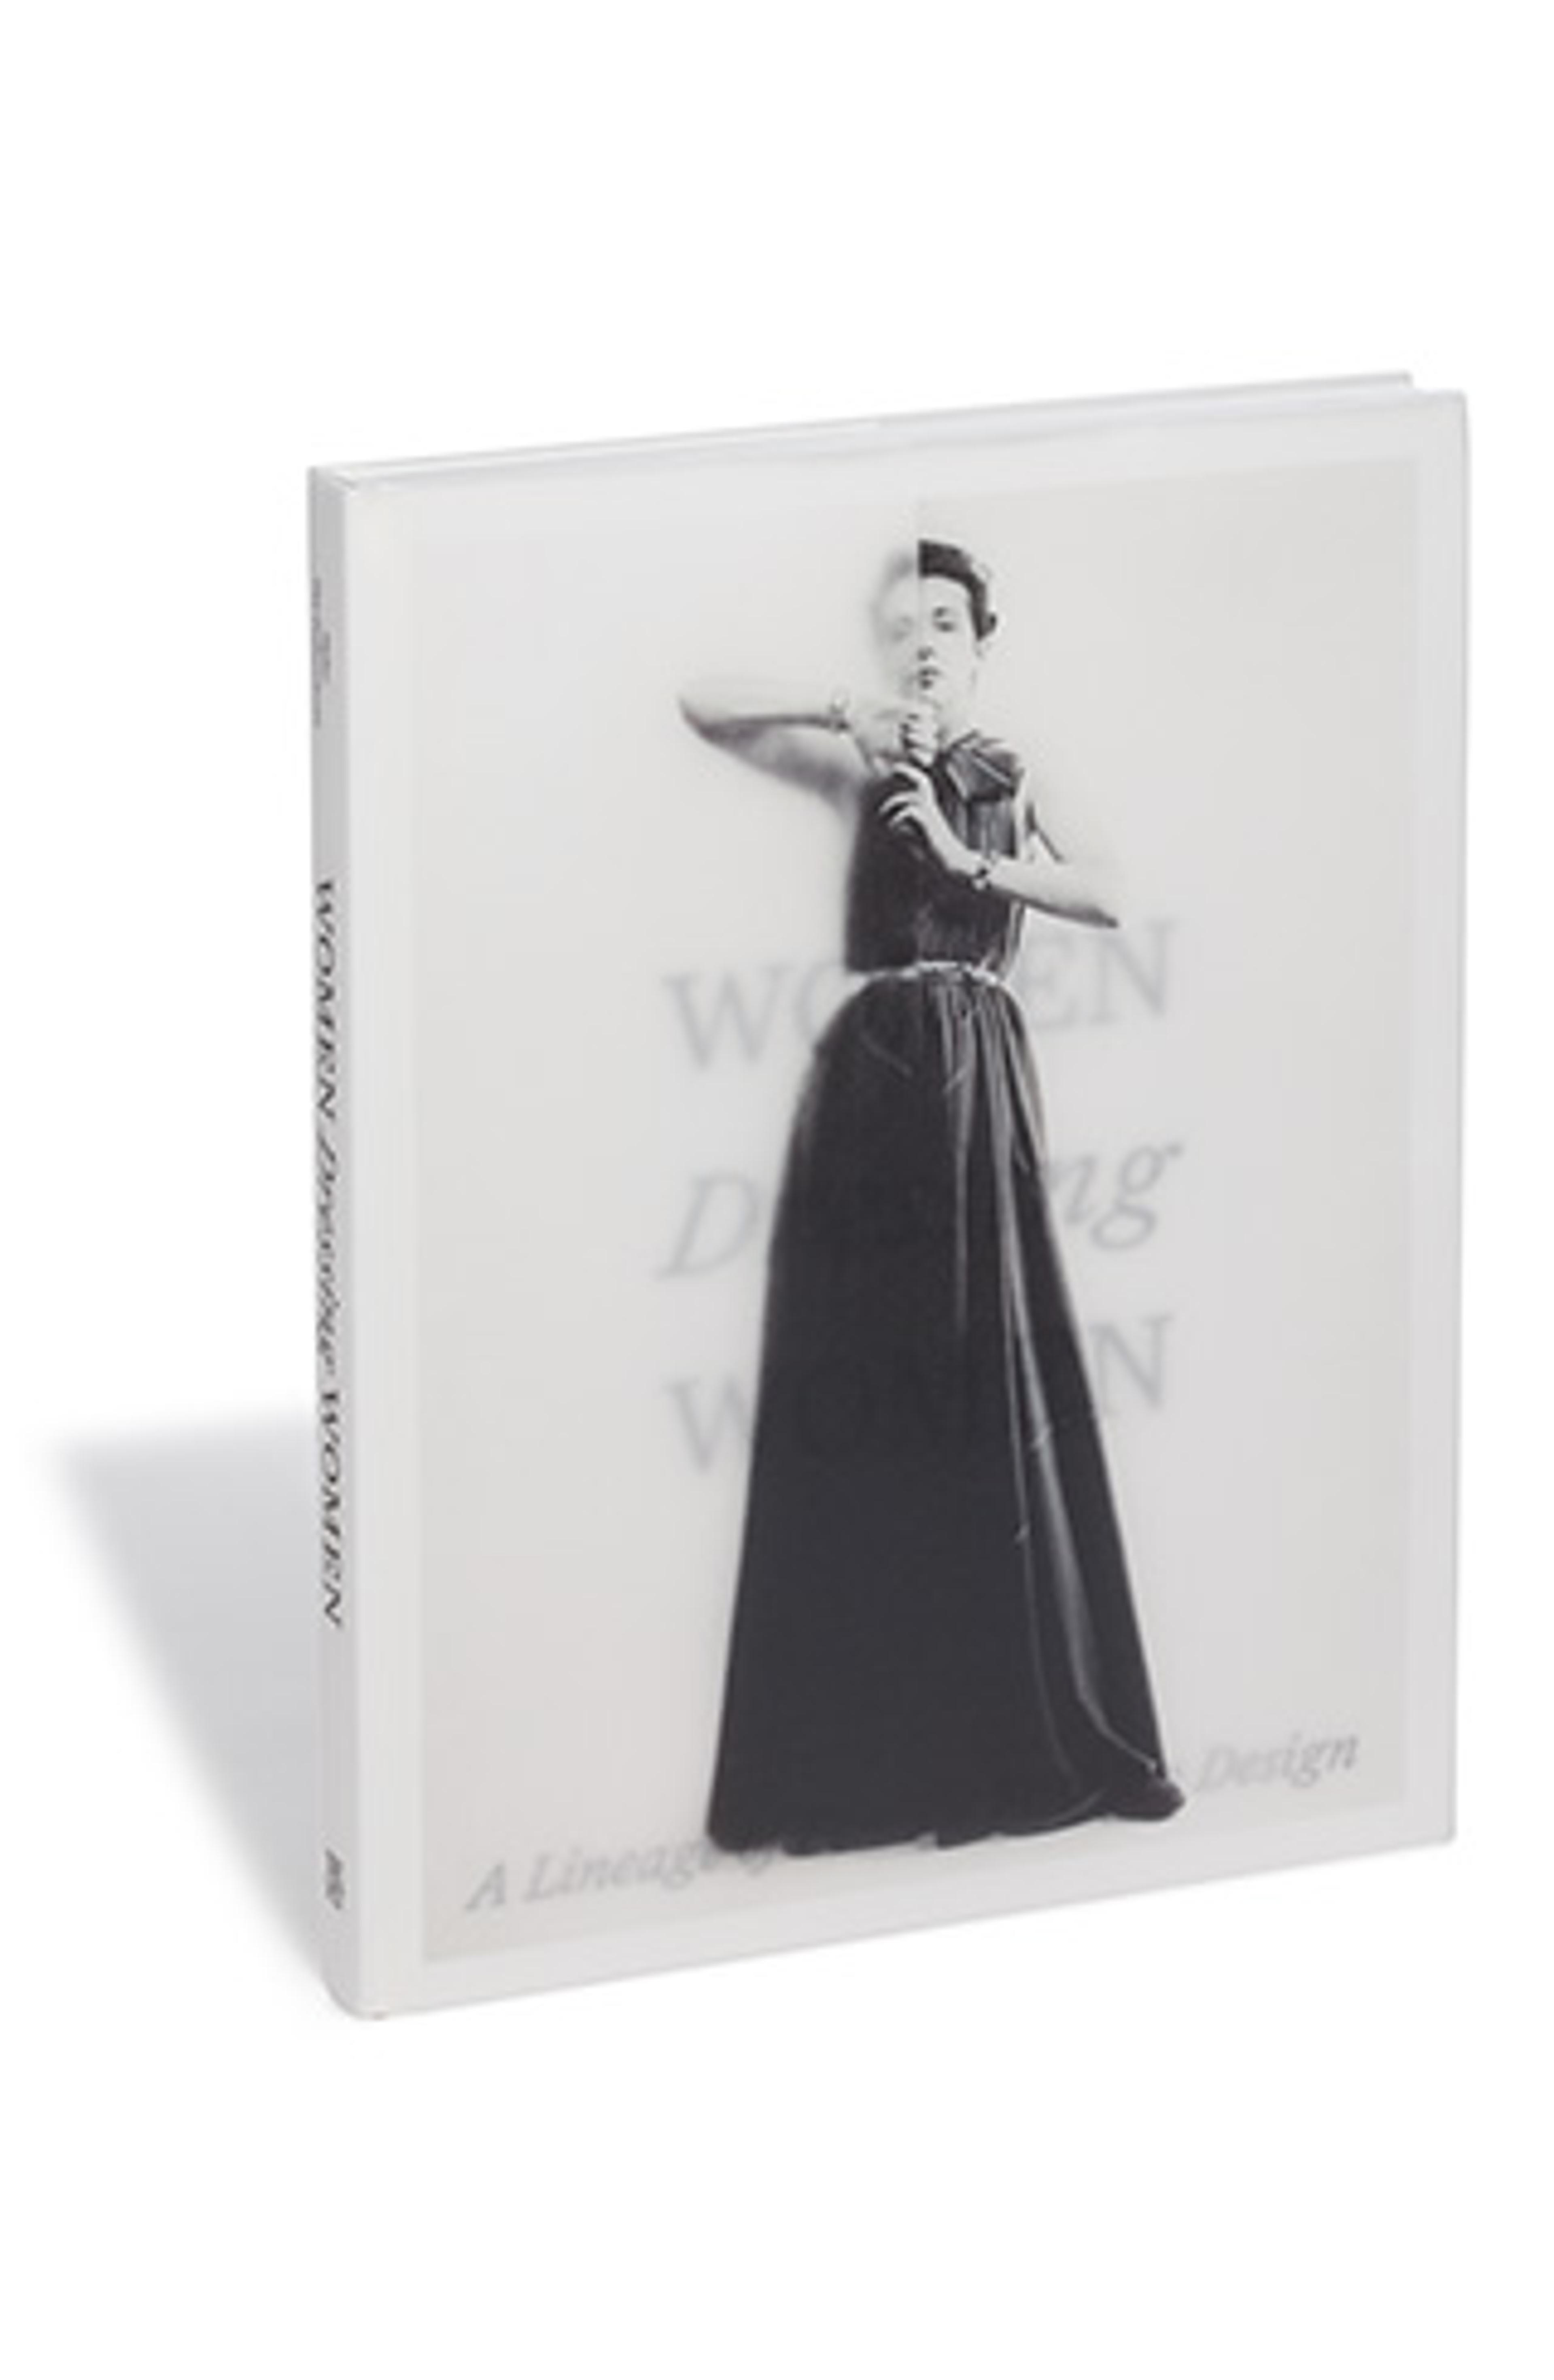 Book cover of woman standing in the middle of cover in black and white